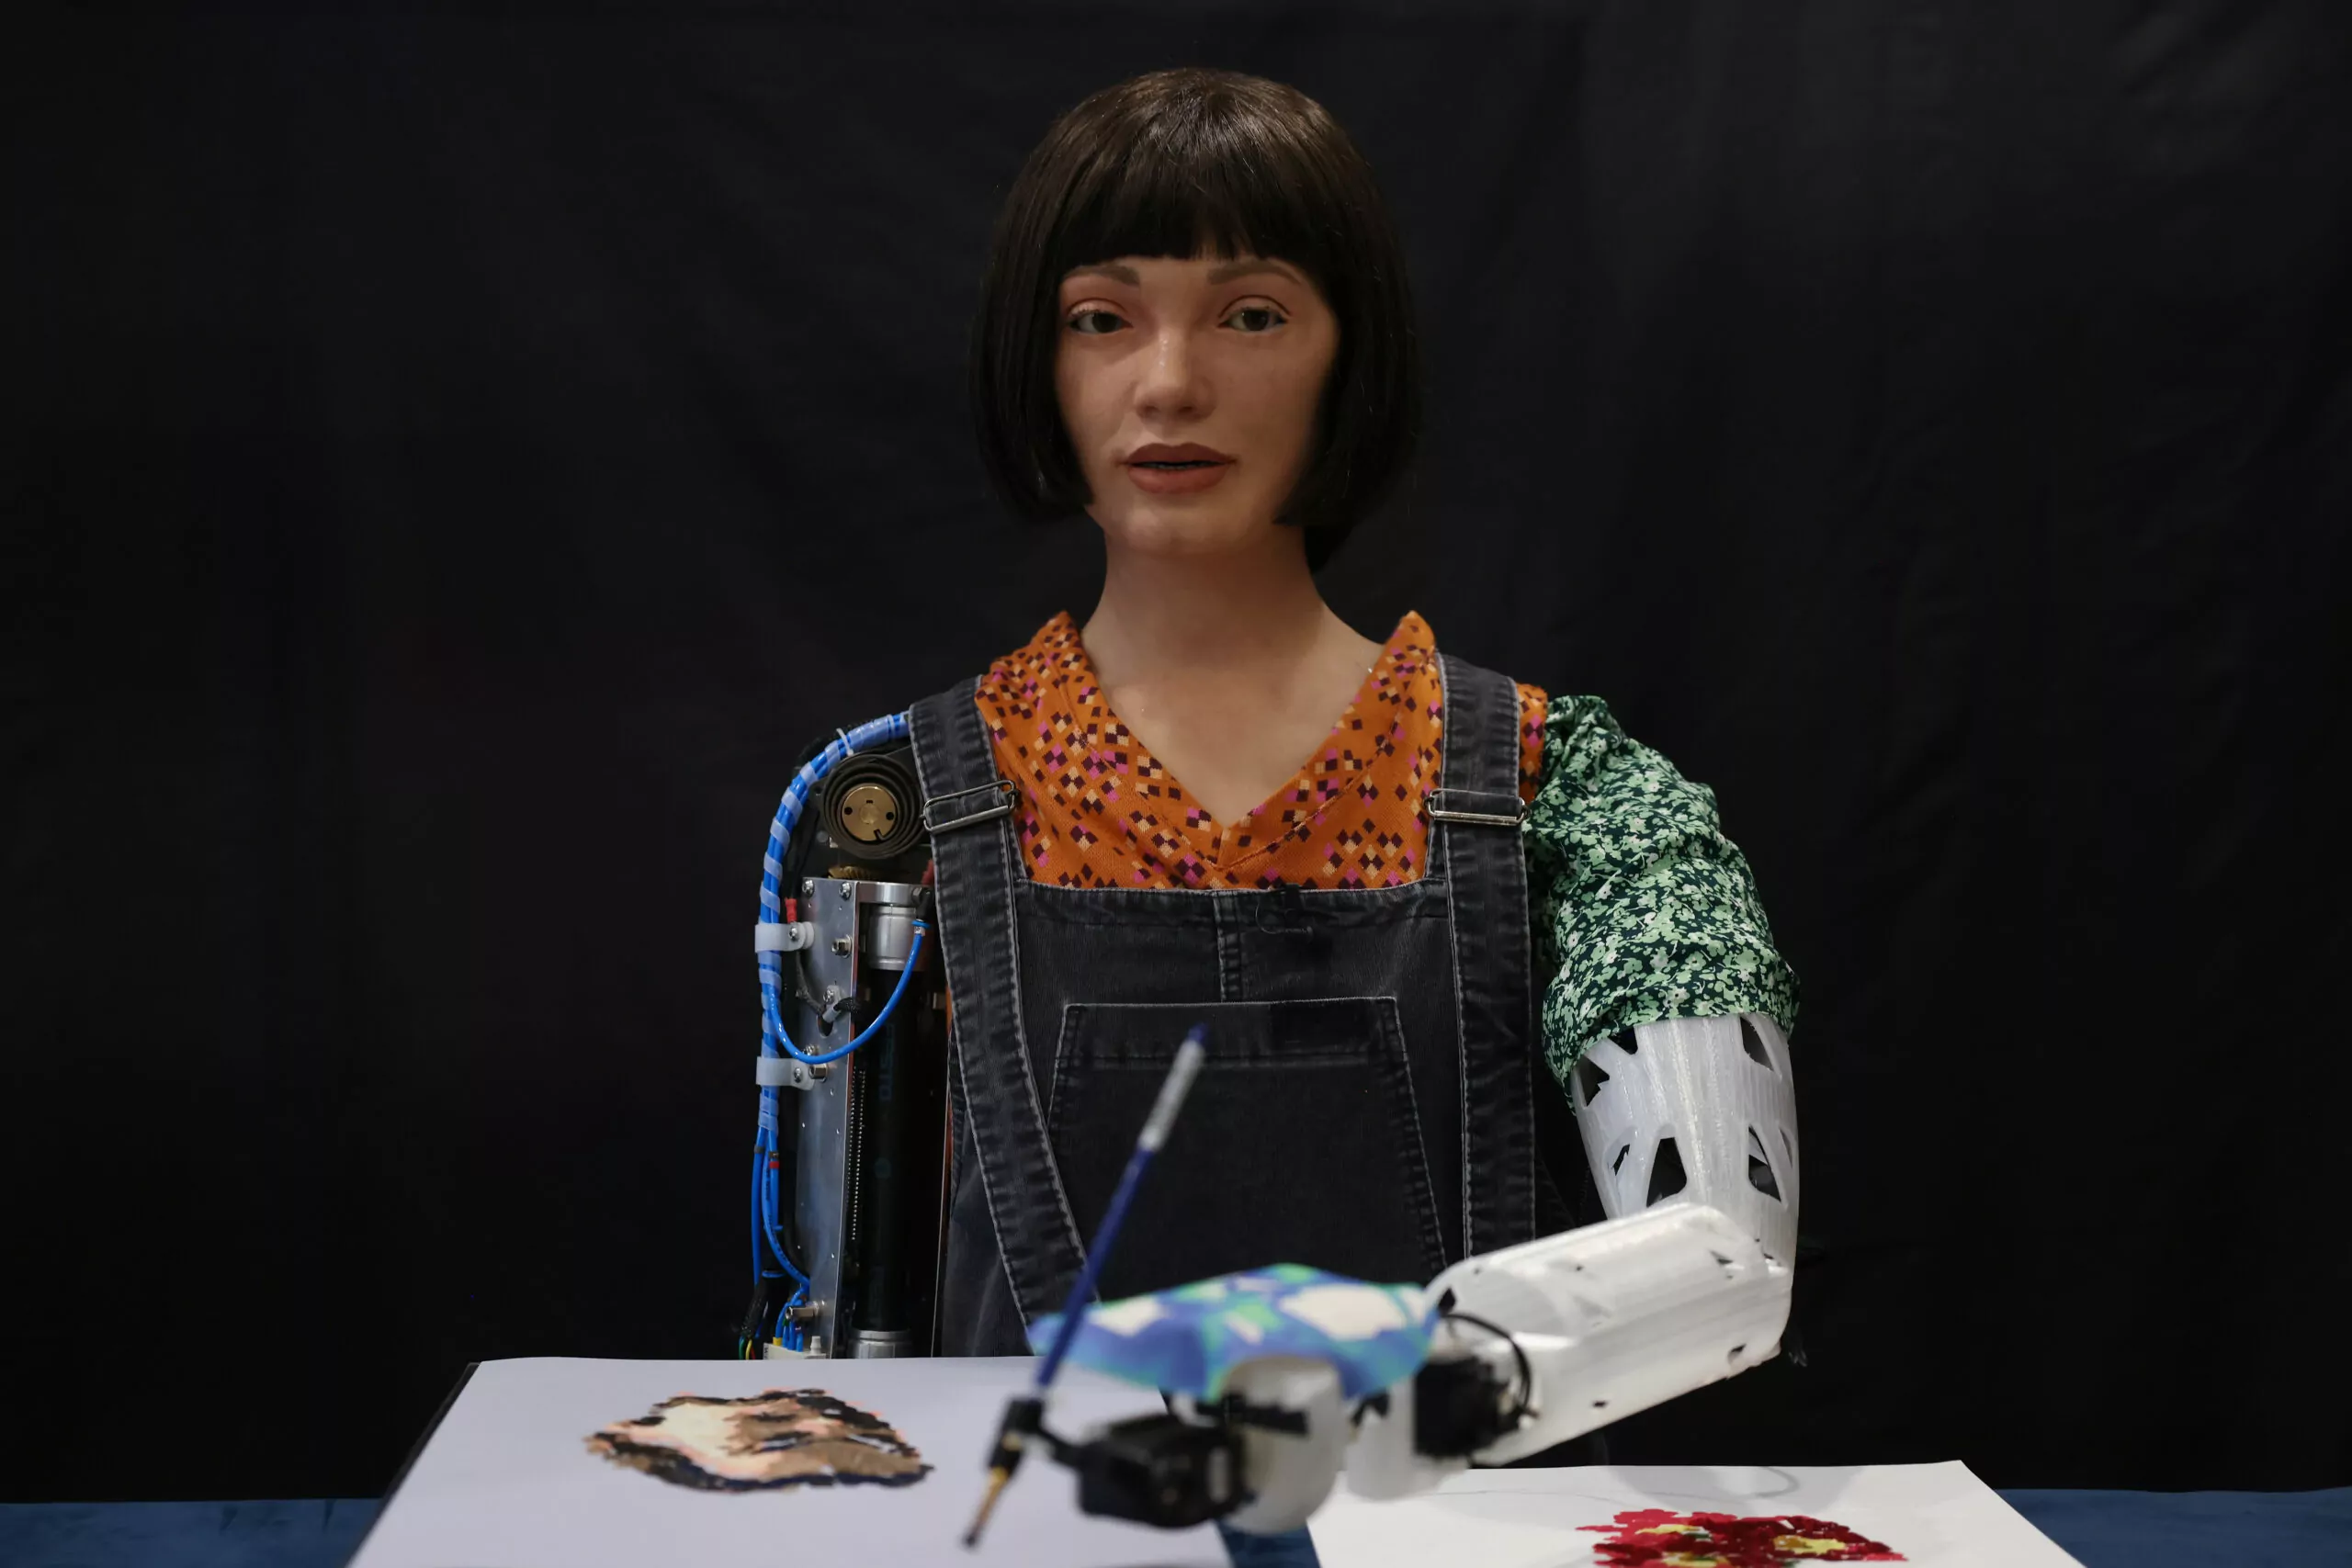 LONDON, ENGLAND - APRIL 04: Ai-Da Robot, an ultra-realistic humanoid robot artist, paints during a press call at The British Library on April 4, 2022 in London, England. Ai-Da will open her solo exhibition LEAPING INTO THE METAVERSE at the Venice Biennale this year curated by Aidan Meller. (Photo by Hollie Adams/Getty Images)